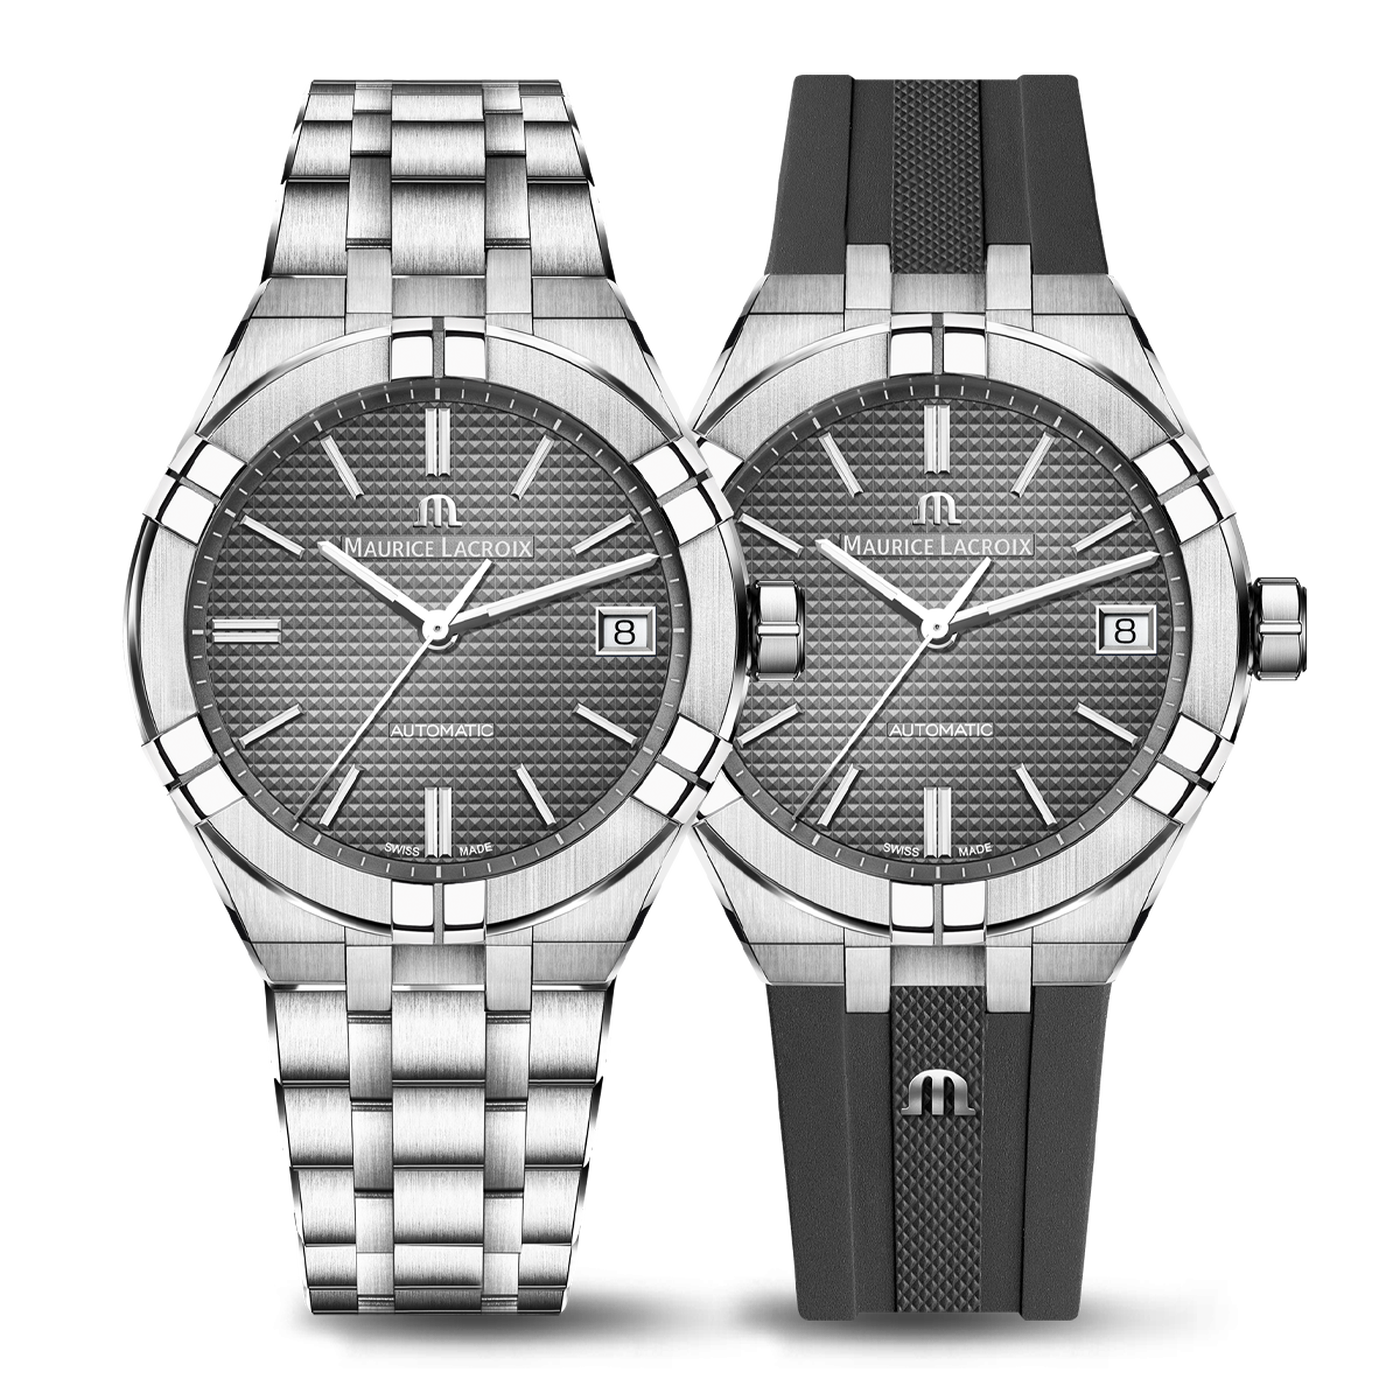 AIKON AUTOMATIC DATE 39MM - - | Maurice International Lacroix AIKON collection